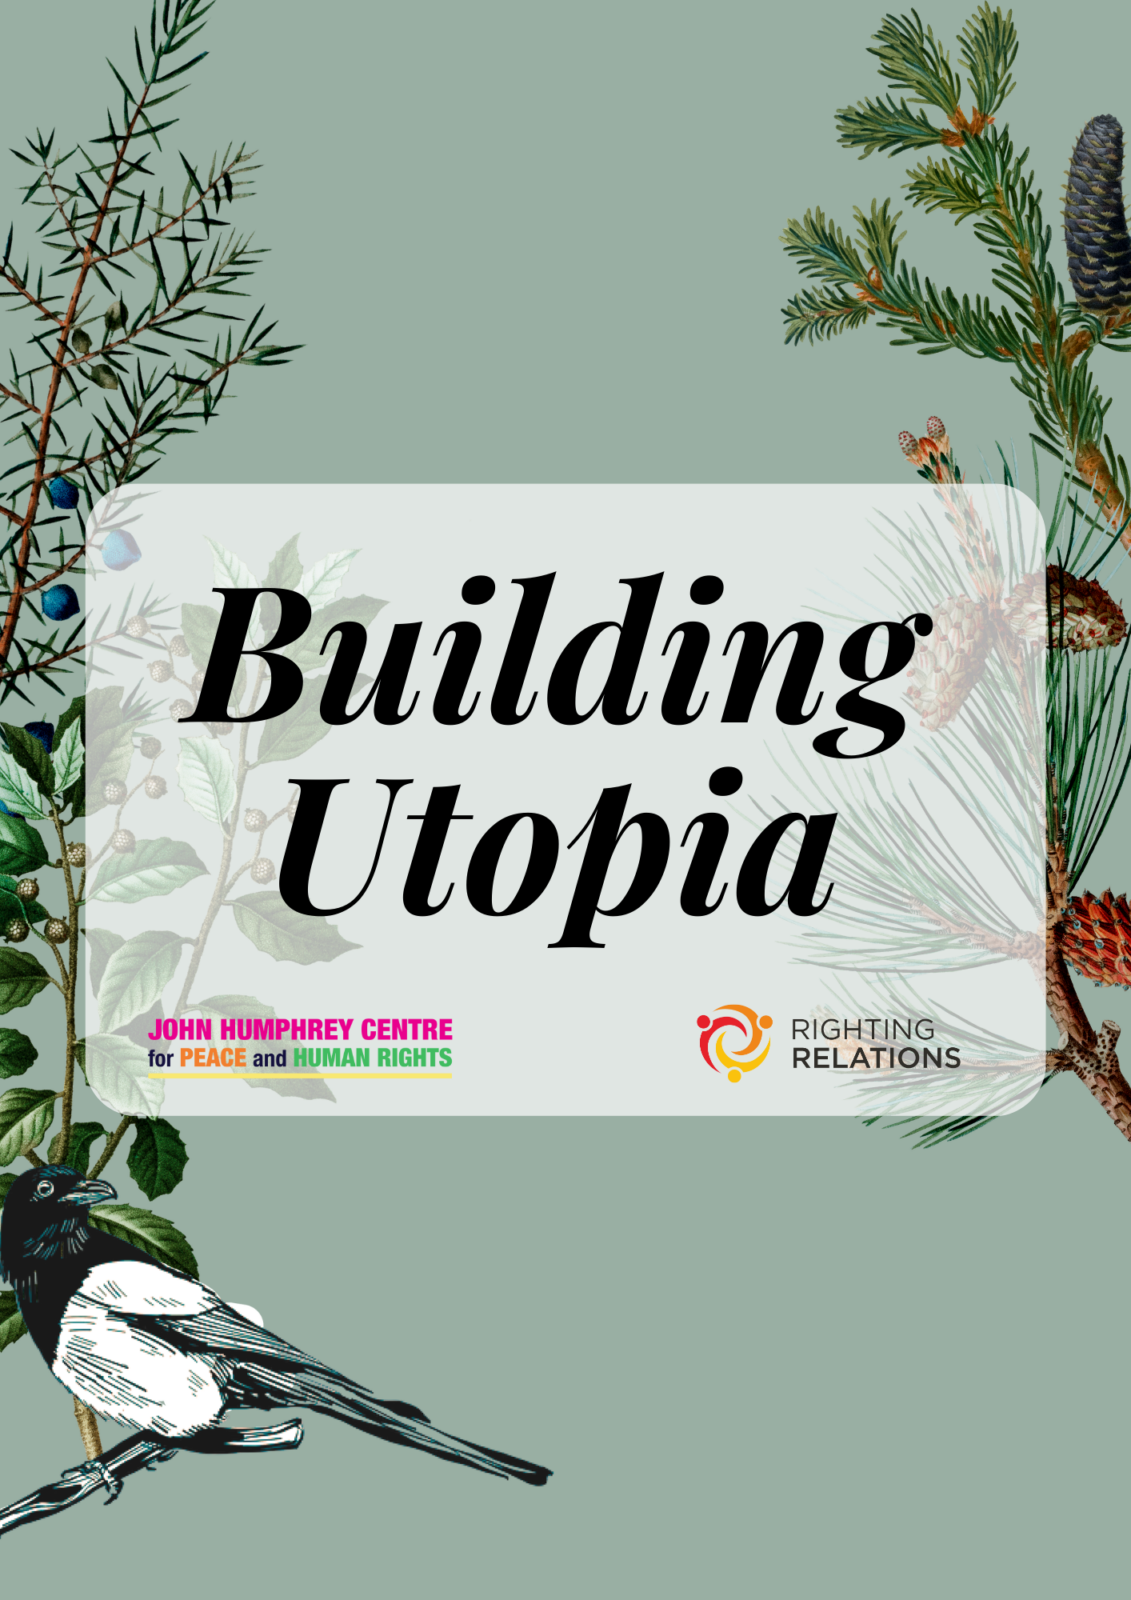 A sage green background with branches and leaves on the left and right border, and an illustration of a magpie in the bottom left corner. In the centre, text reads "Building Utopia". Beneath this are the logos for Righting Relations and the John Humphrey Centre